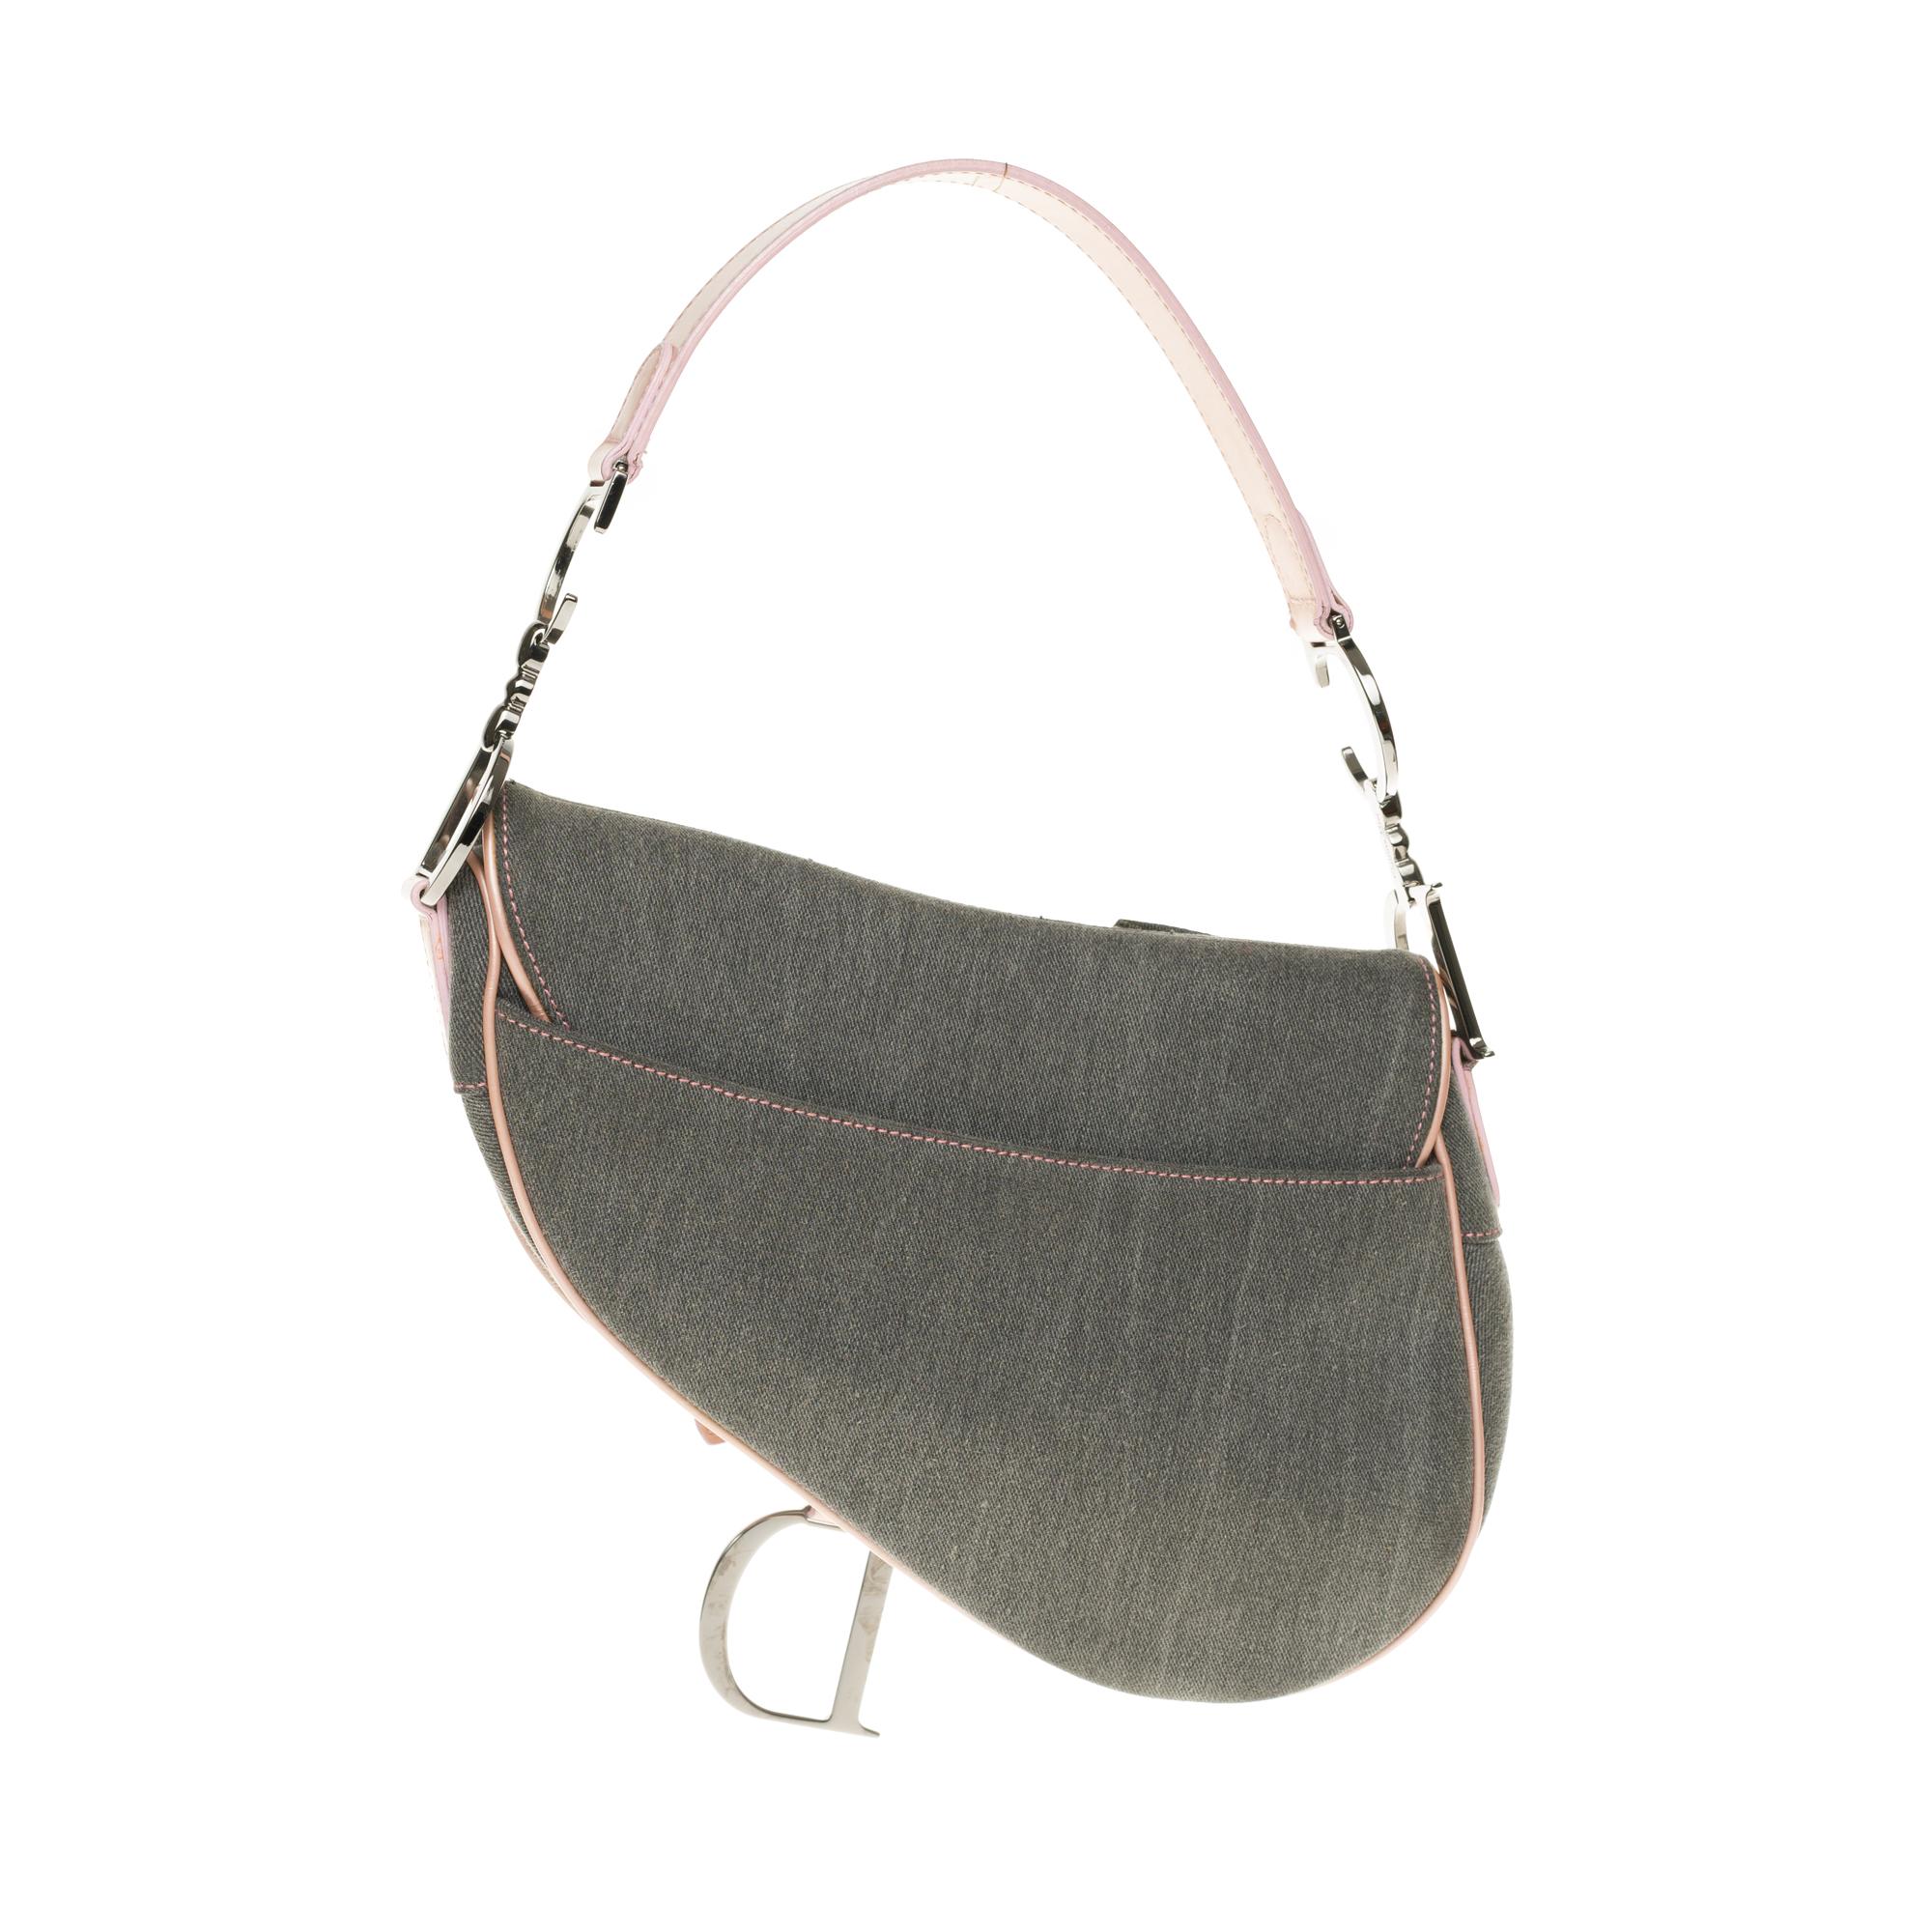 Lovely Dior handbag in blue denim canvas and pink patent leather, silver metal trim, a thin pink patent leather handle allowing a shoulder strap.

Leather flap closure.
A thin pocket on the back of the bag.
Monogrammed black satin inner lining, one